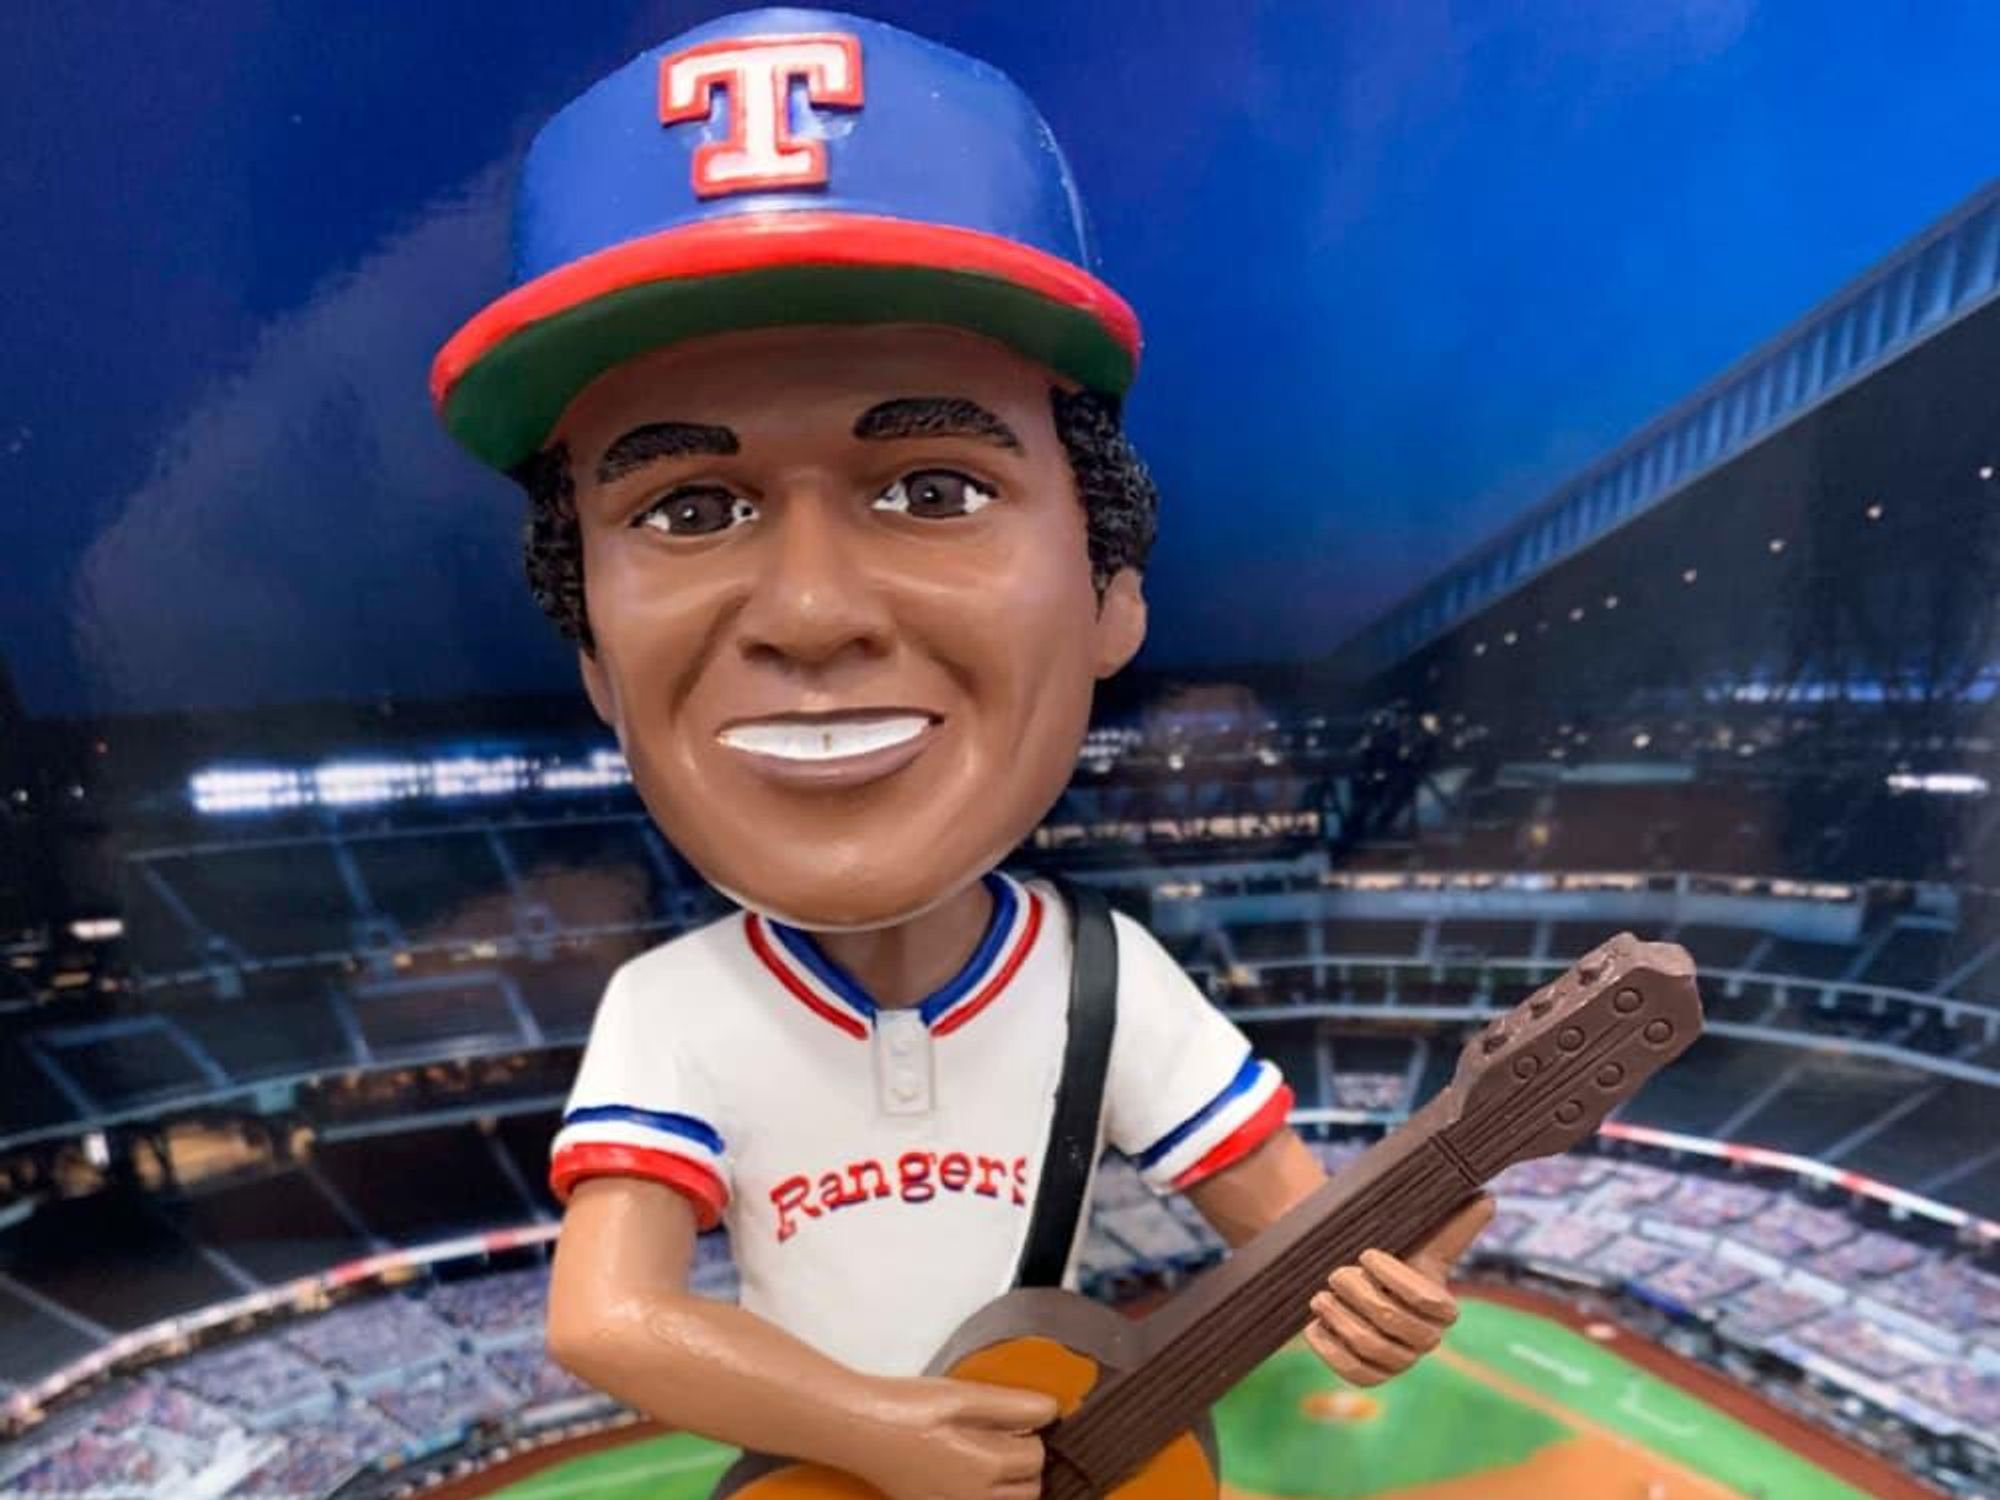 Charley Pride leads 2022 lineup of Texas Rangers promo bobbleheads